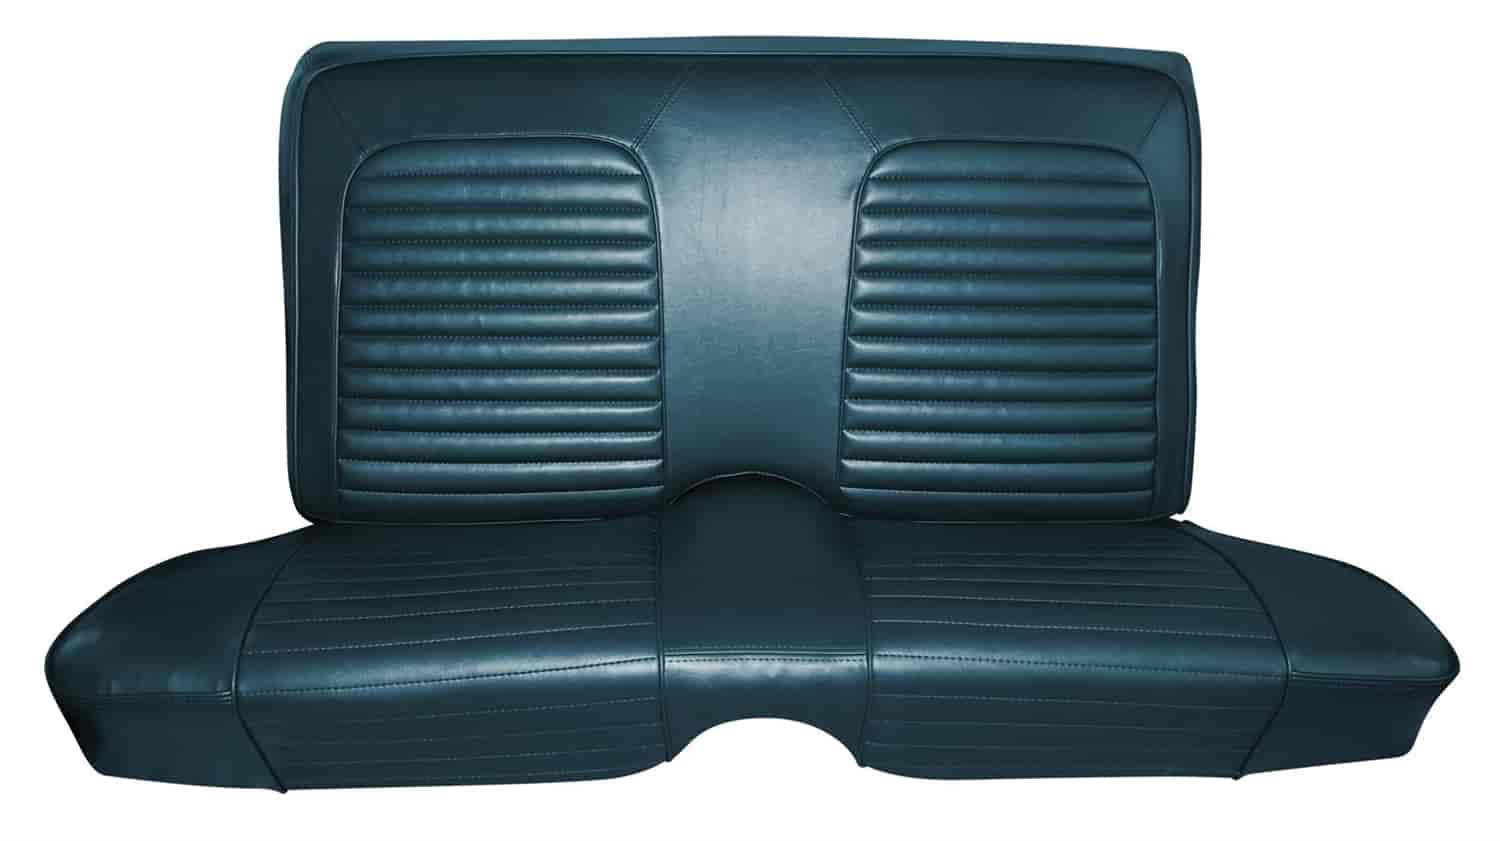 1964 Ford Falcon Futura 2-Door Sedan Two-Tone Deluxe Interior Front and Rear Bench Seat Upholstery Set